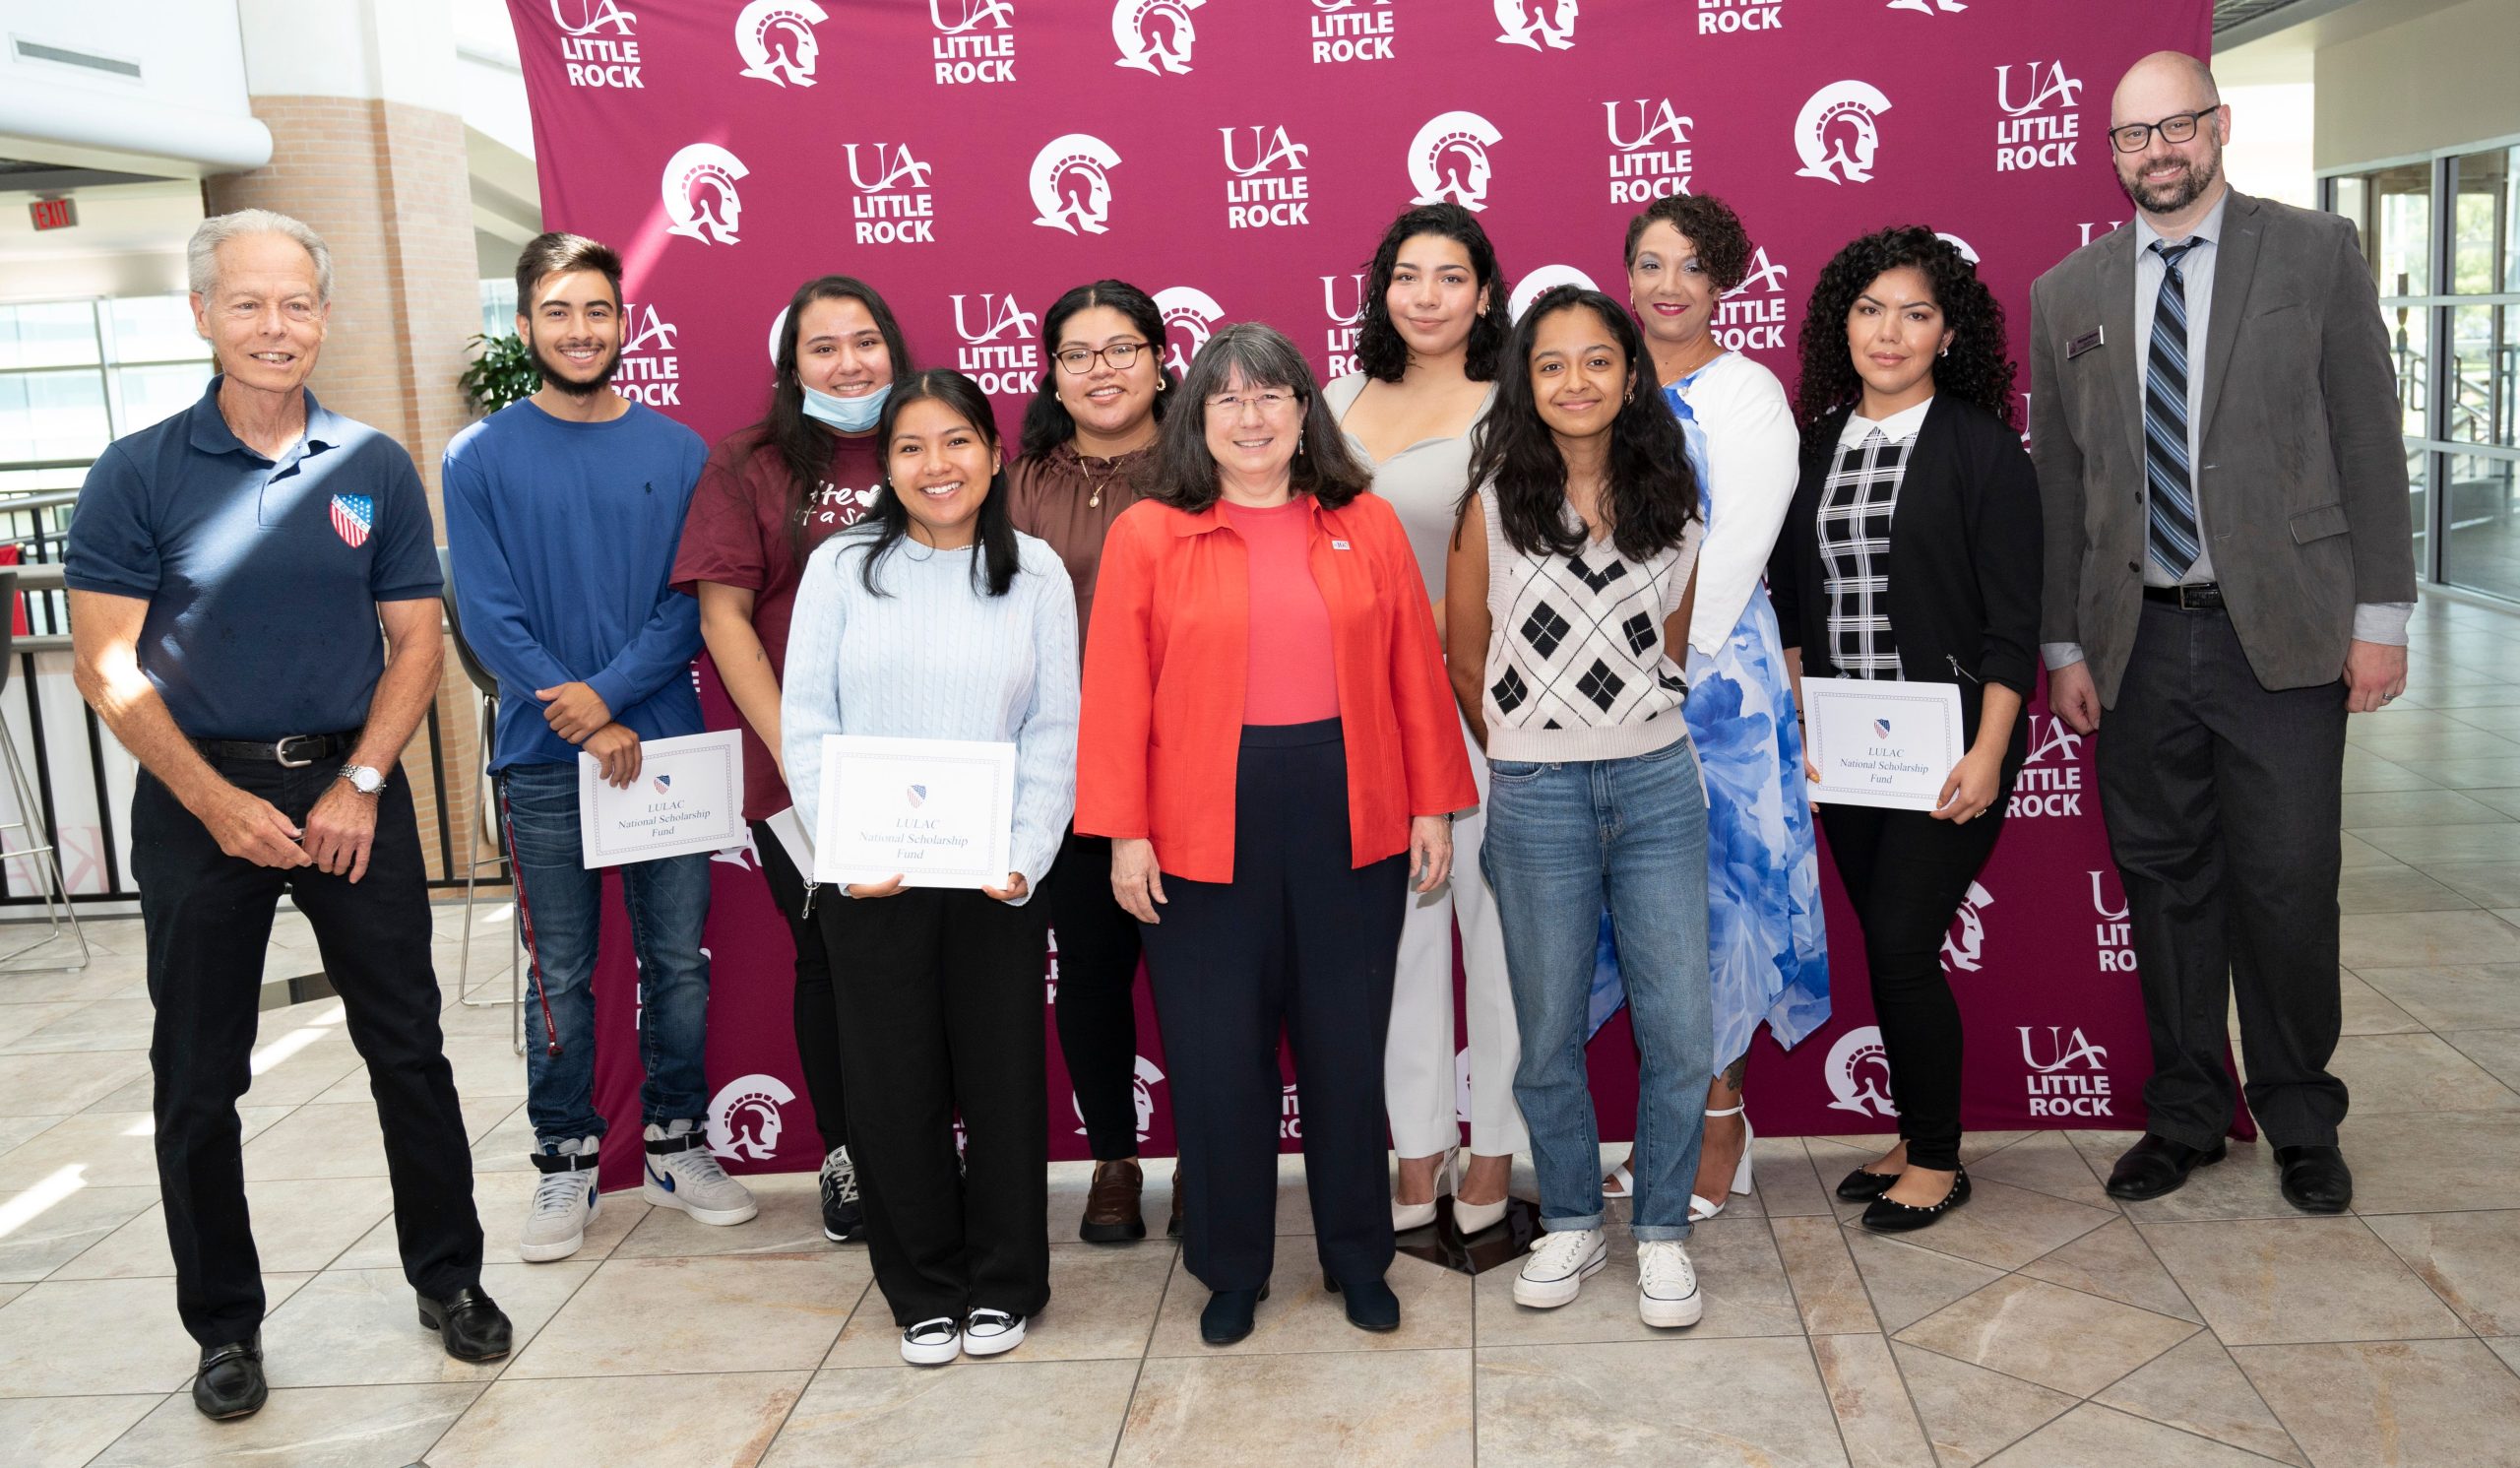 This photo of UA Little Rock student LULAC scholarship recipients was taken by Brian Chilson of the Arkansas Times.